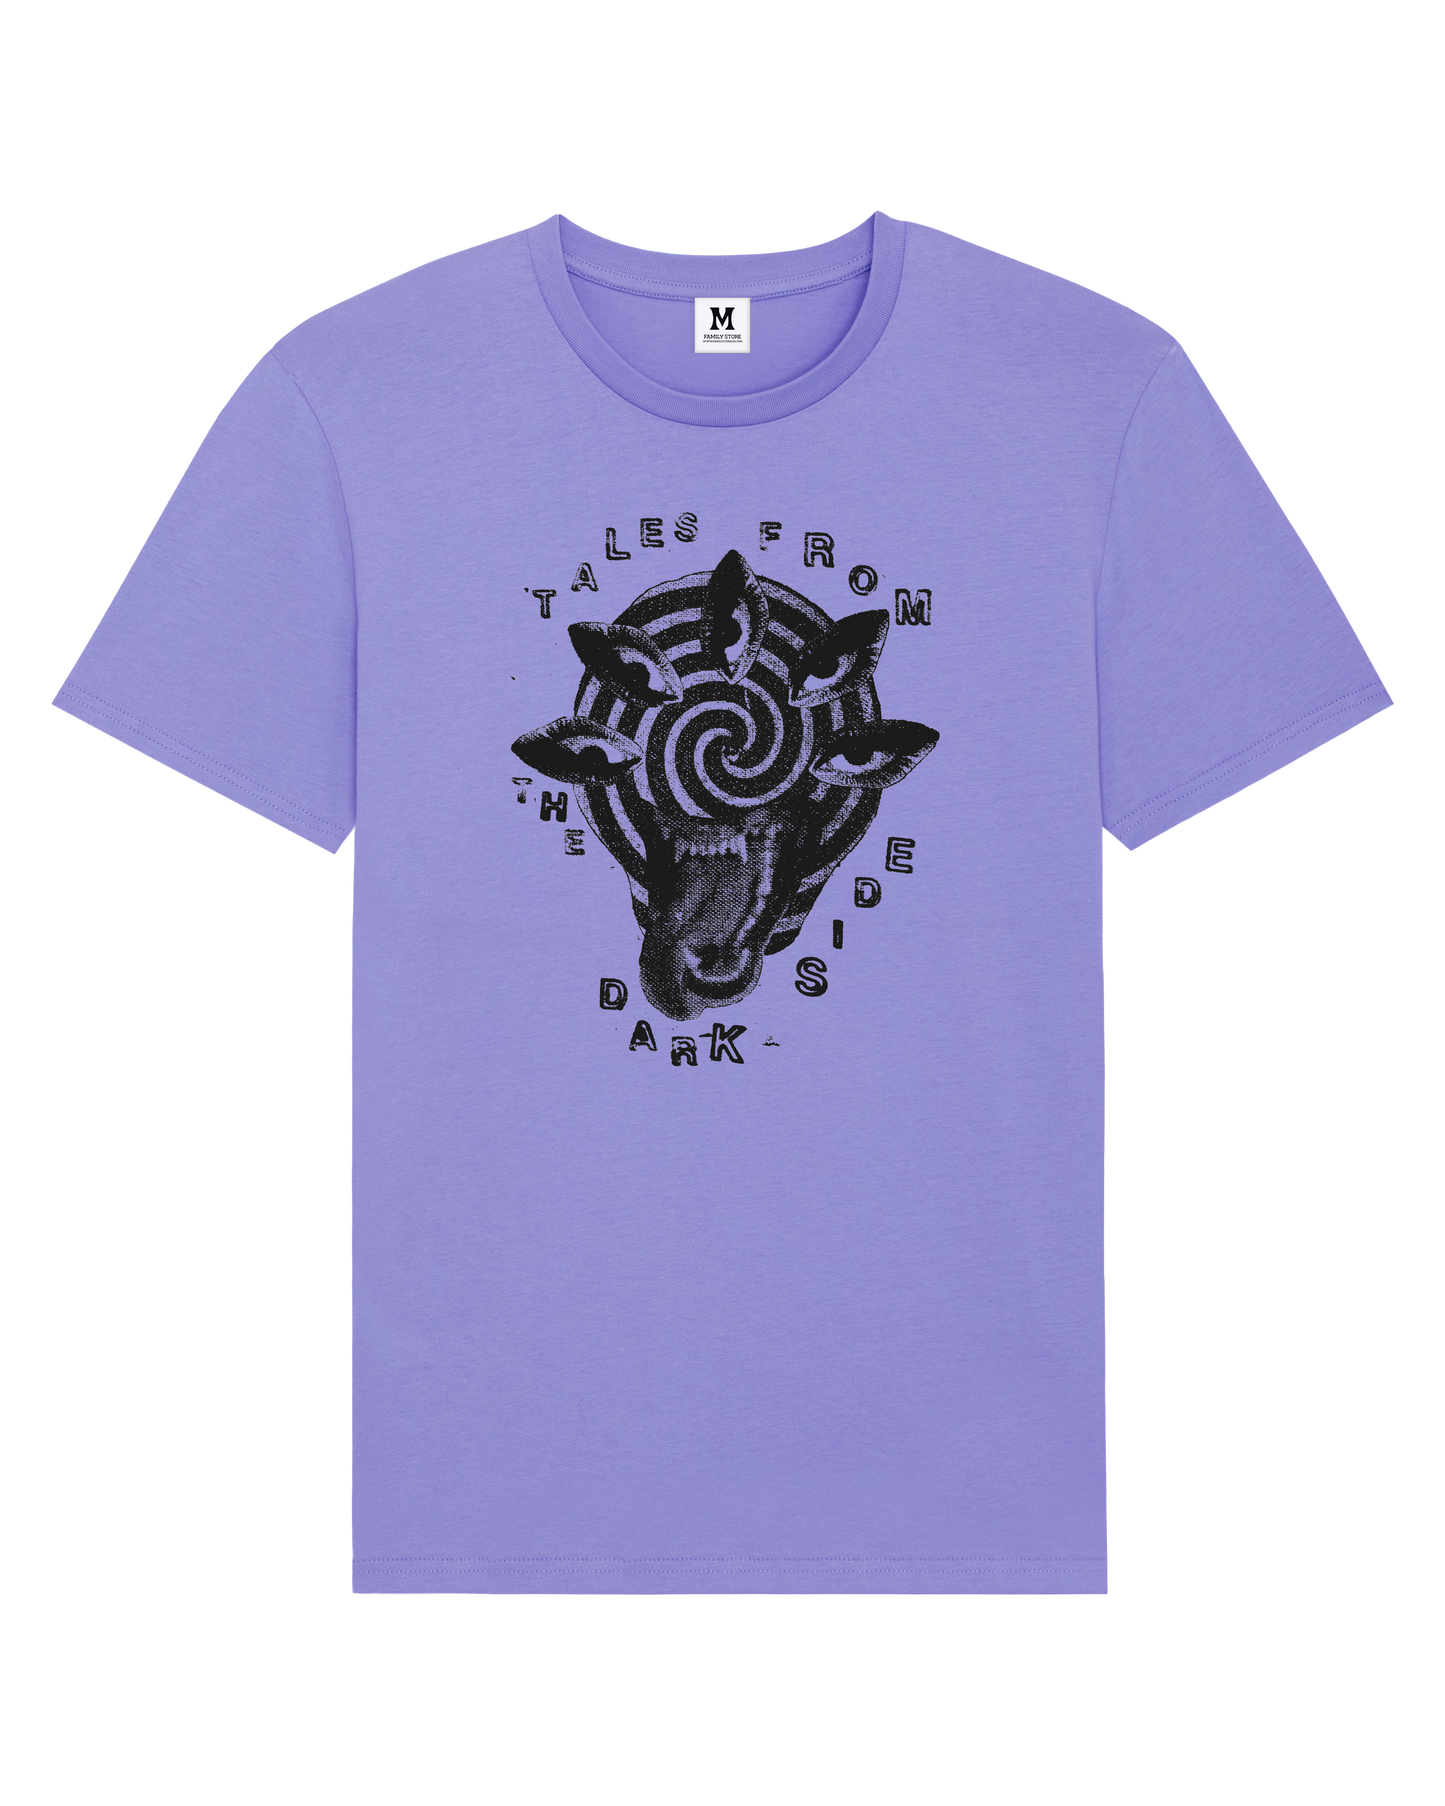 Tales From the Dark Side Violet Tee by Chutskase